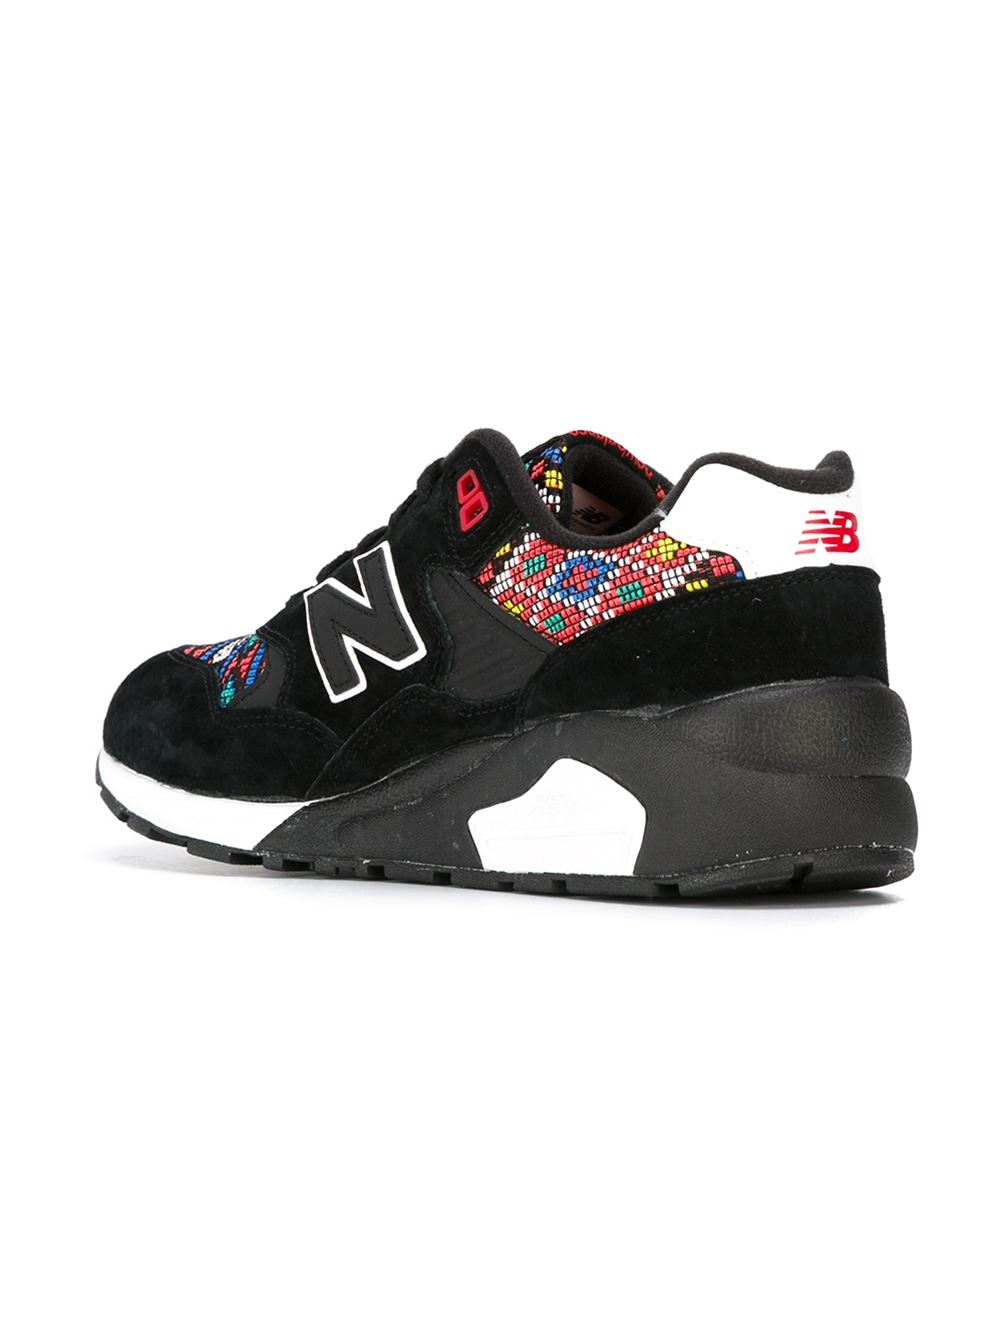 I agree to Mold strong New Balance '580 Elite Edition' Sneakers in Black | Lyst